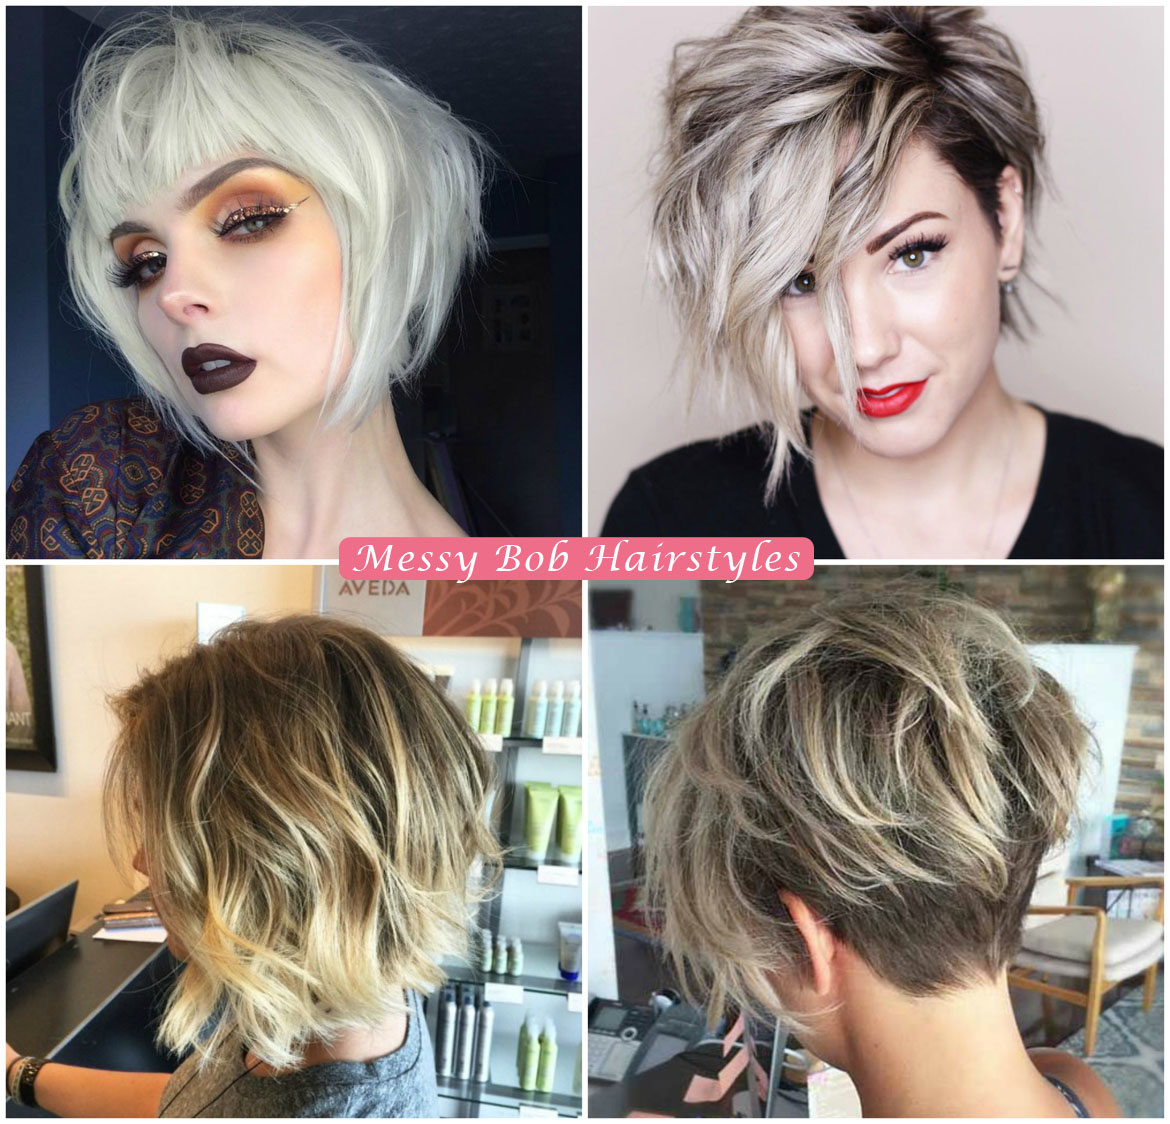 Try Cute Winning Looks With Bob Haircuts - Top Beauty Magazines